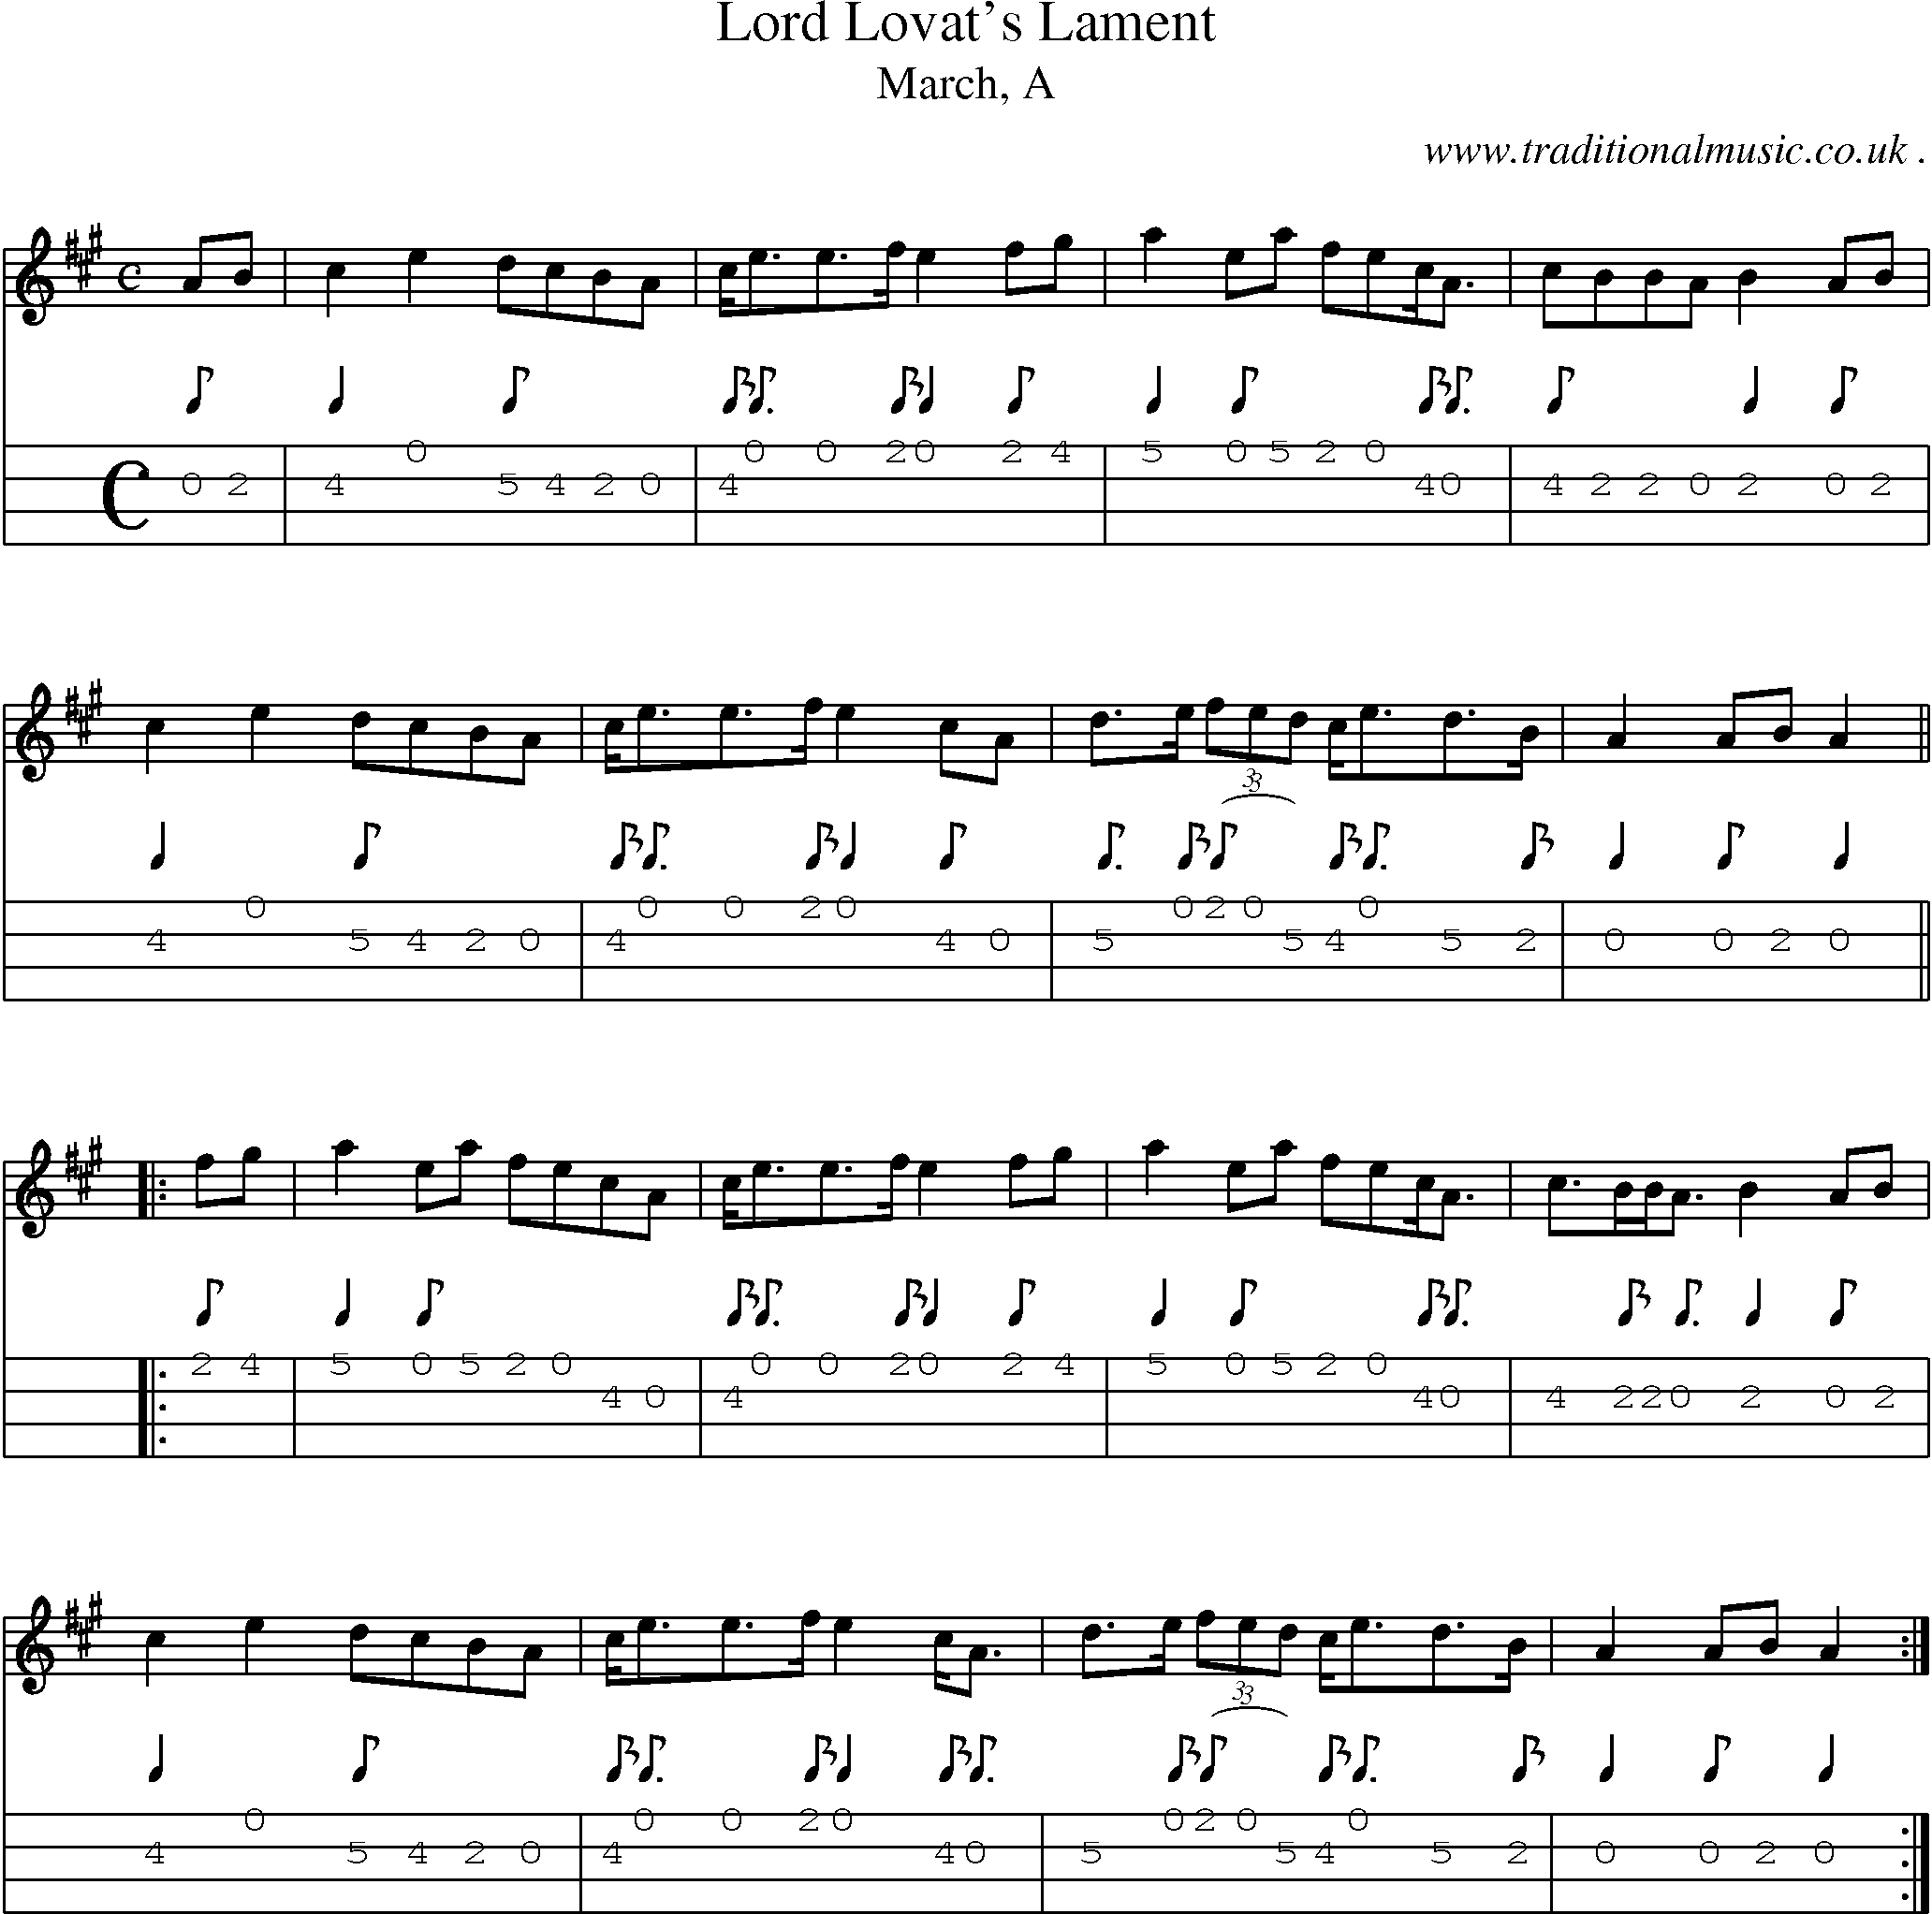 Sheet-music  score, Chords and Mandolin Tabs for Lord Lovats Lament